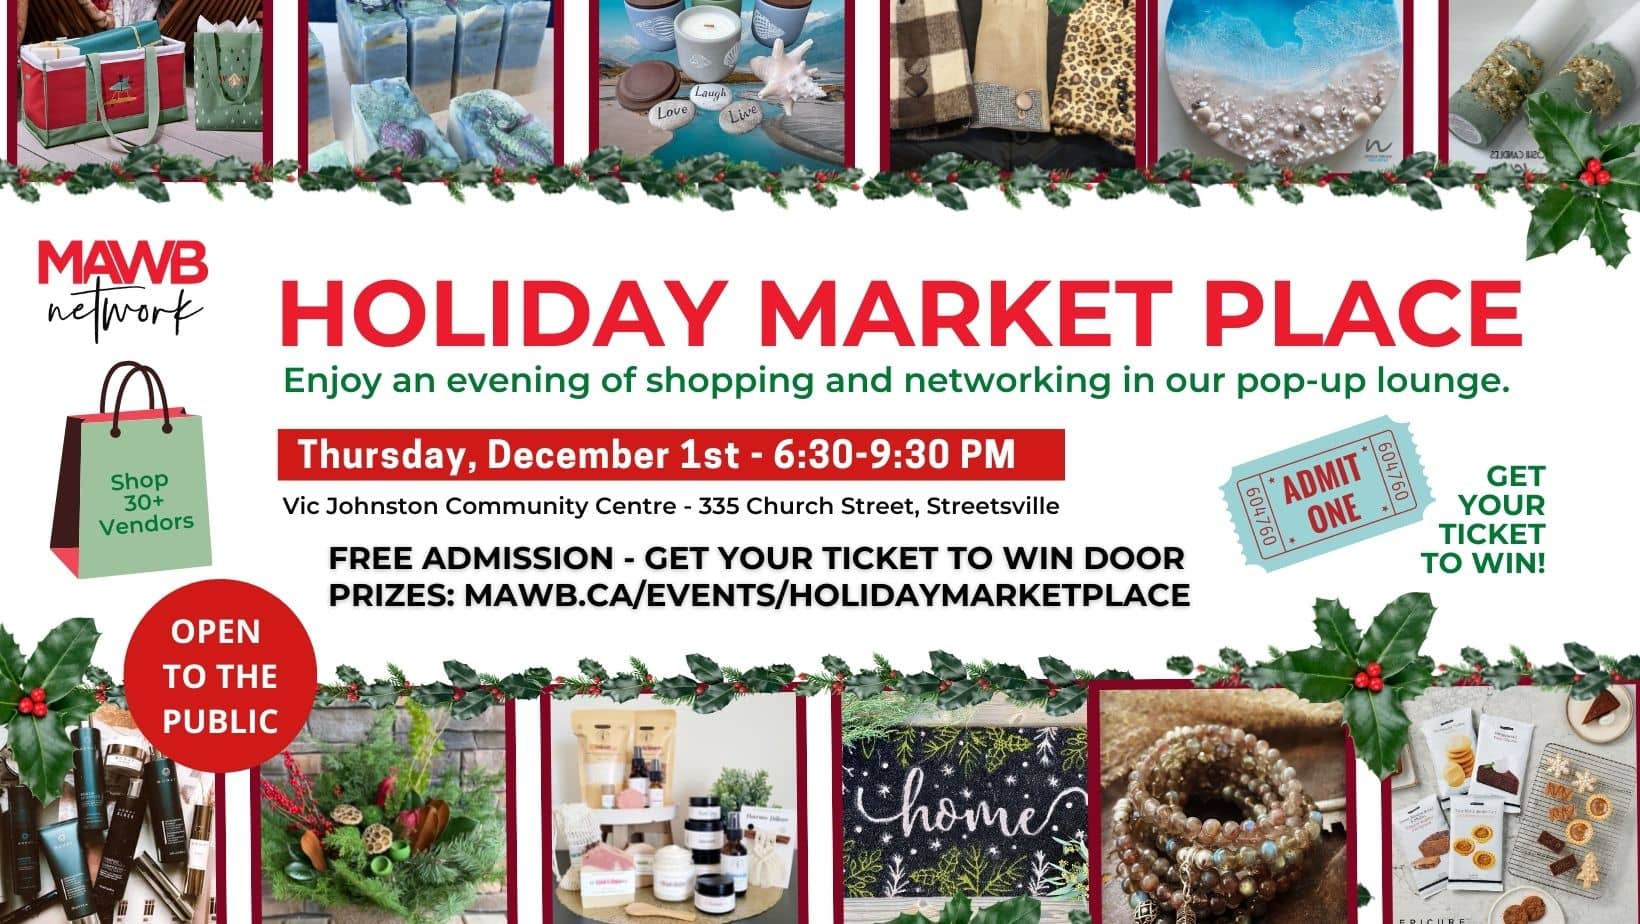 MAWB Holiday Market Place and Pop-Up Networking Lounge